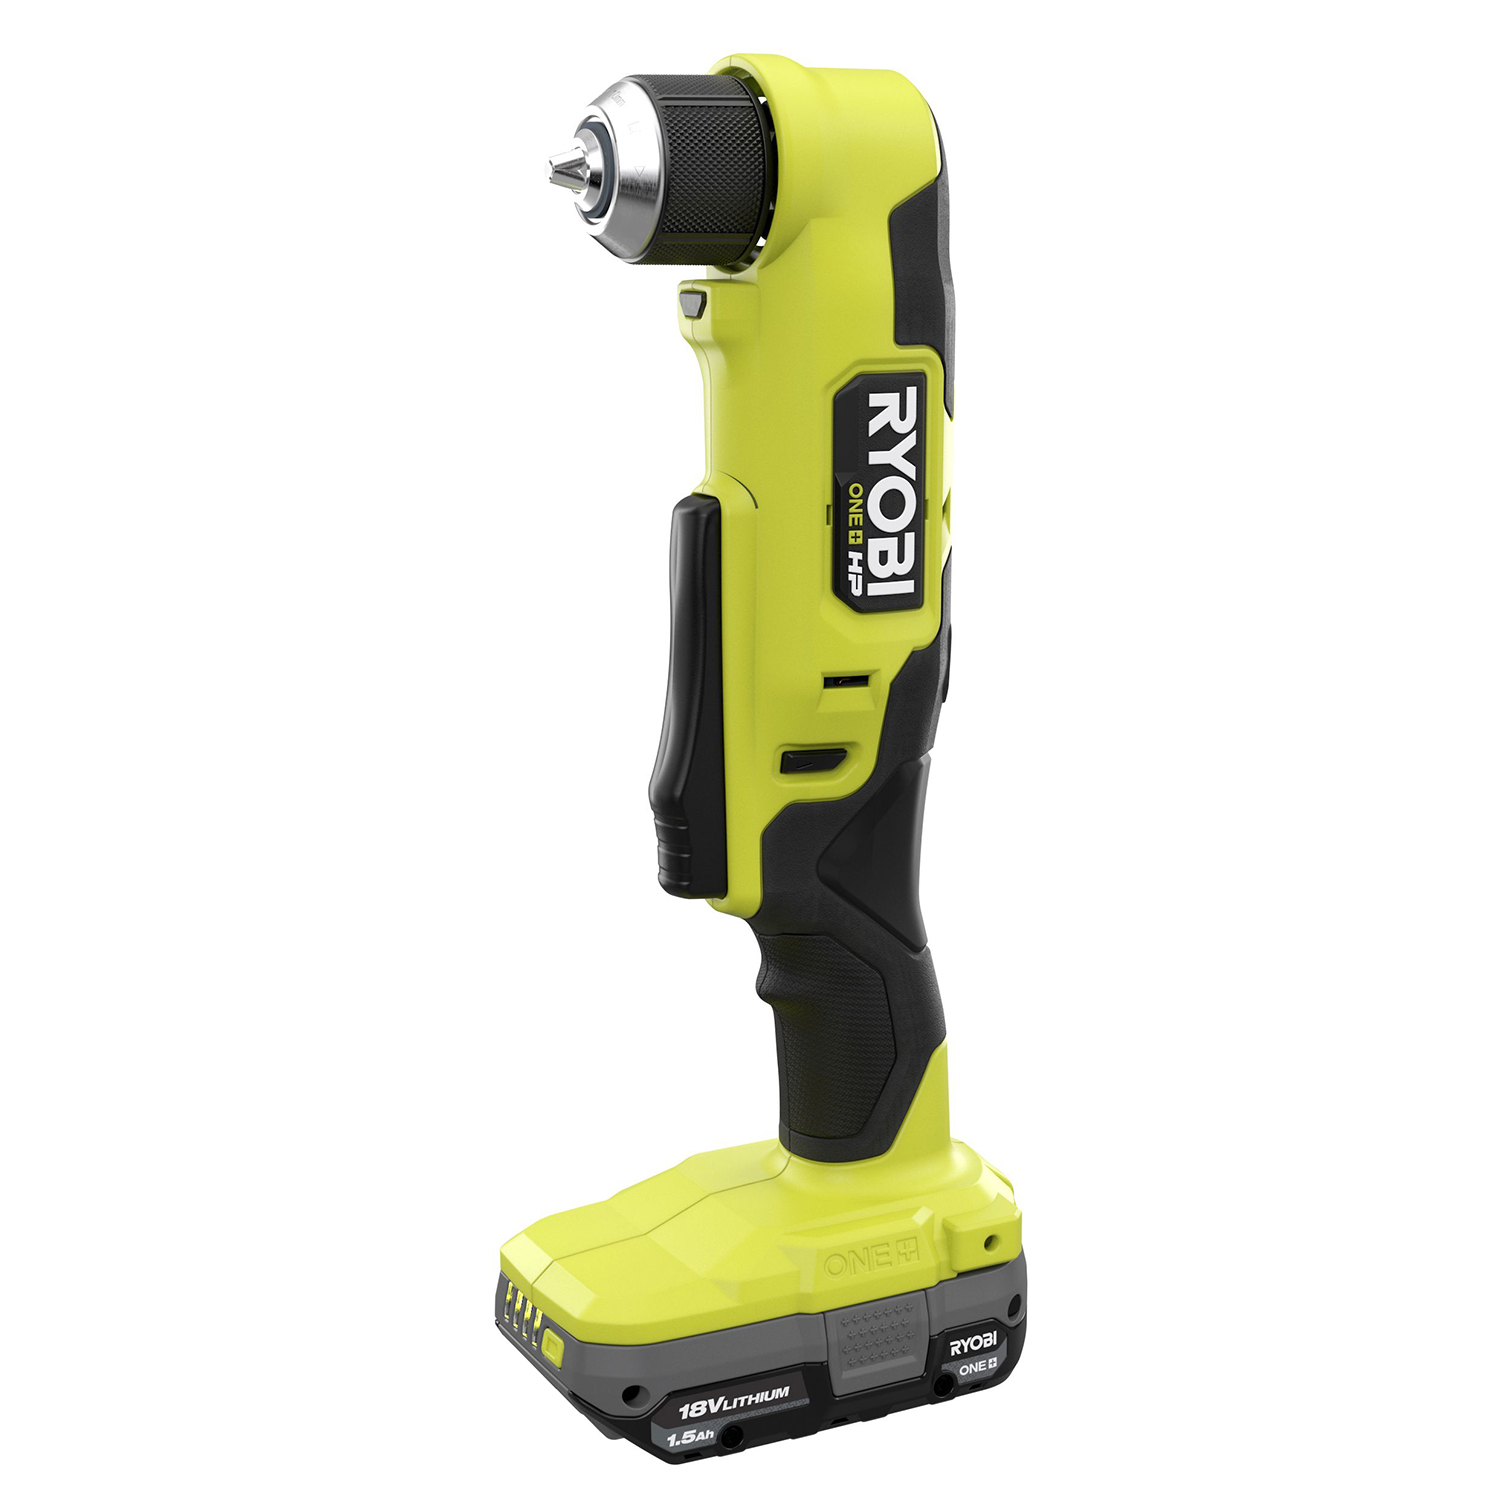 RYOBI ONE+ 18V Cordless 3/8 in. Right Angle Drill (Tool-Only) P241